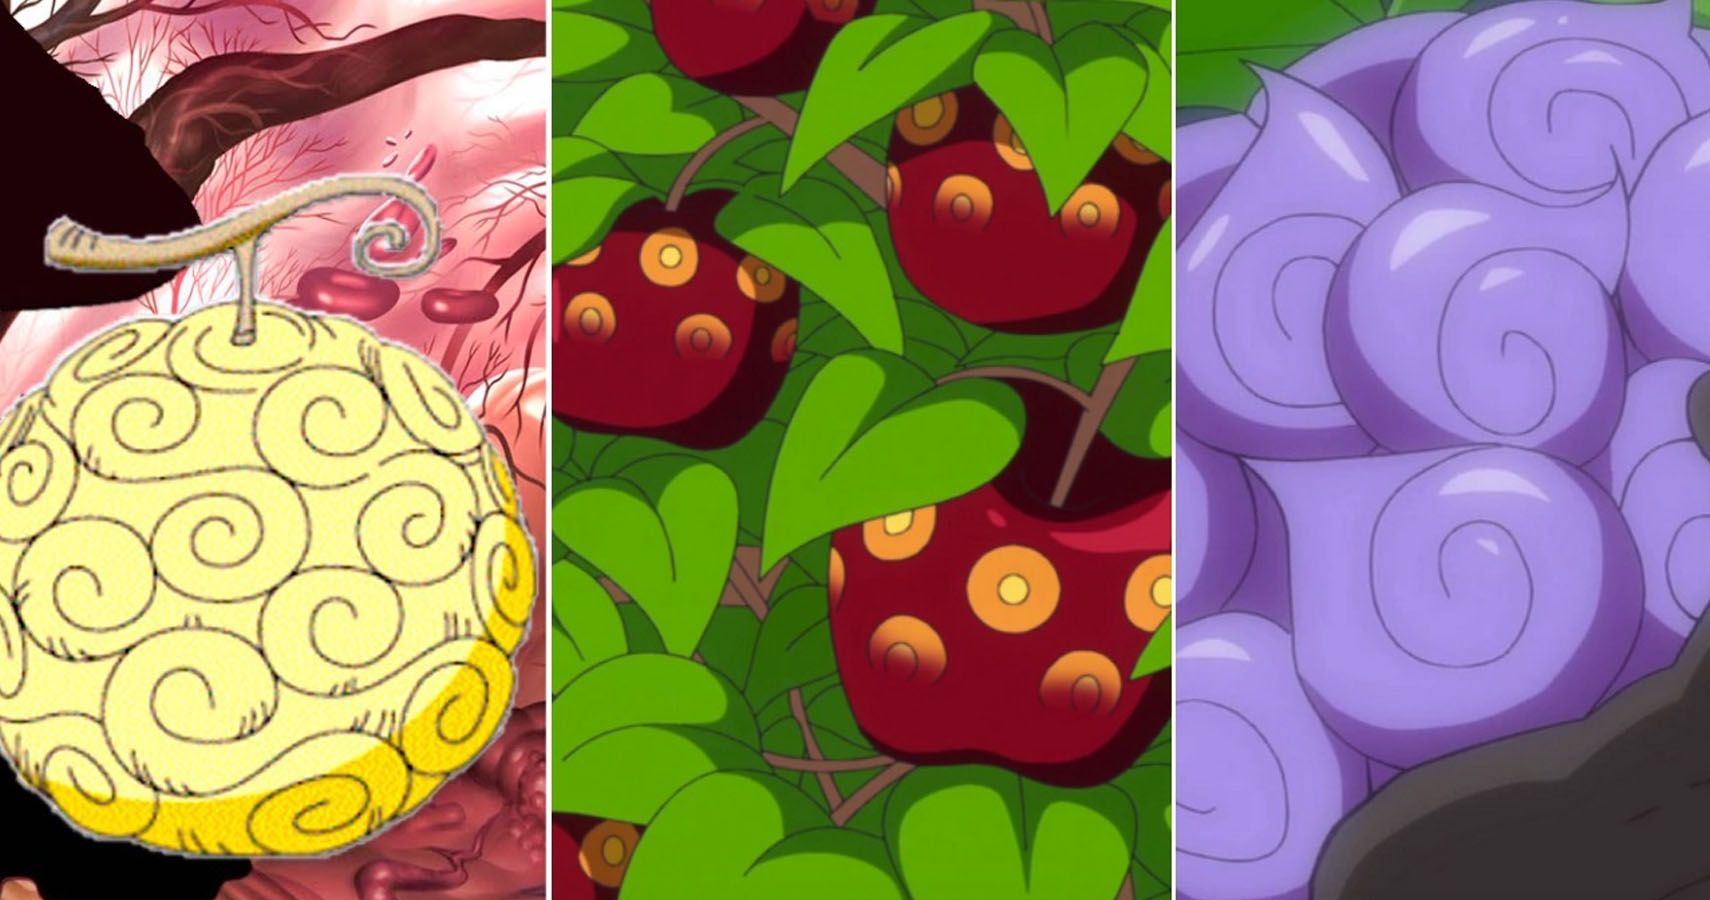 How many devil fruit powers are there の ギ ャ ラ リ.